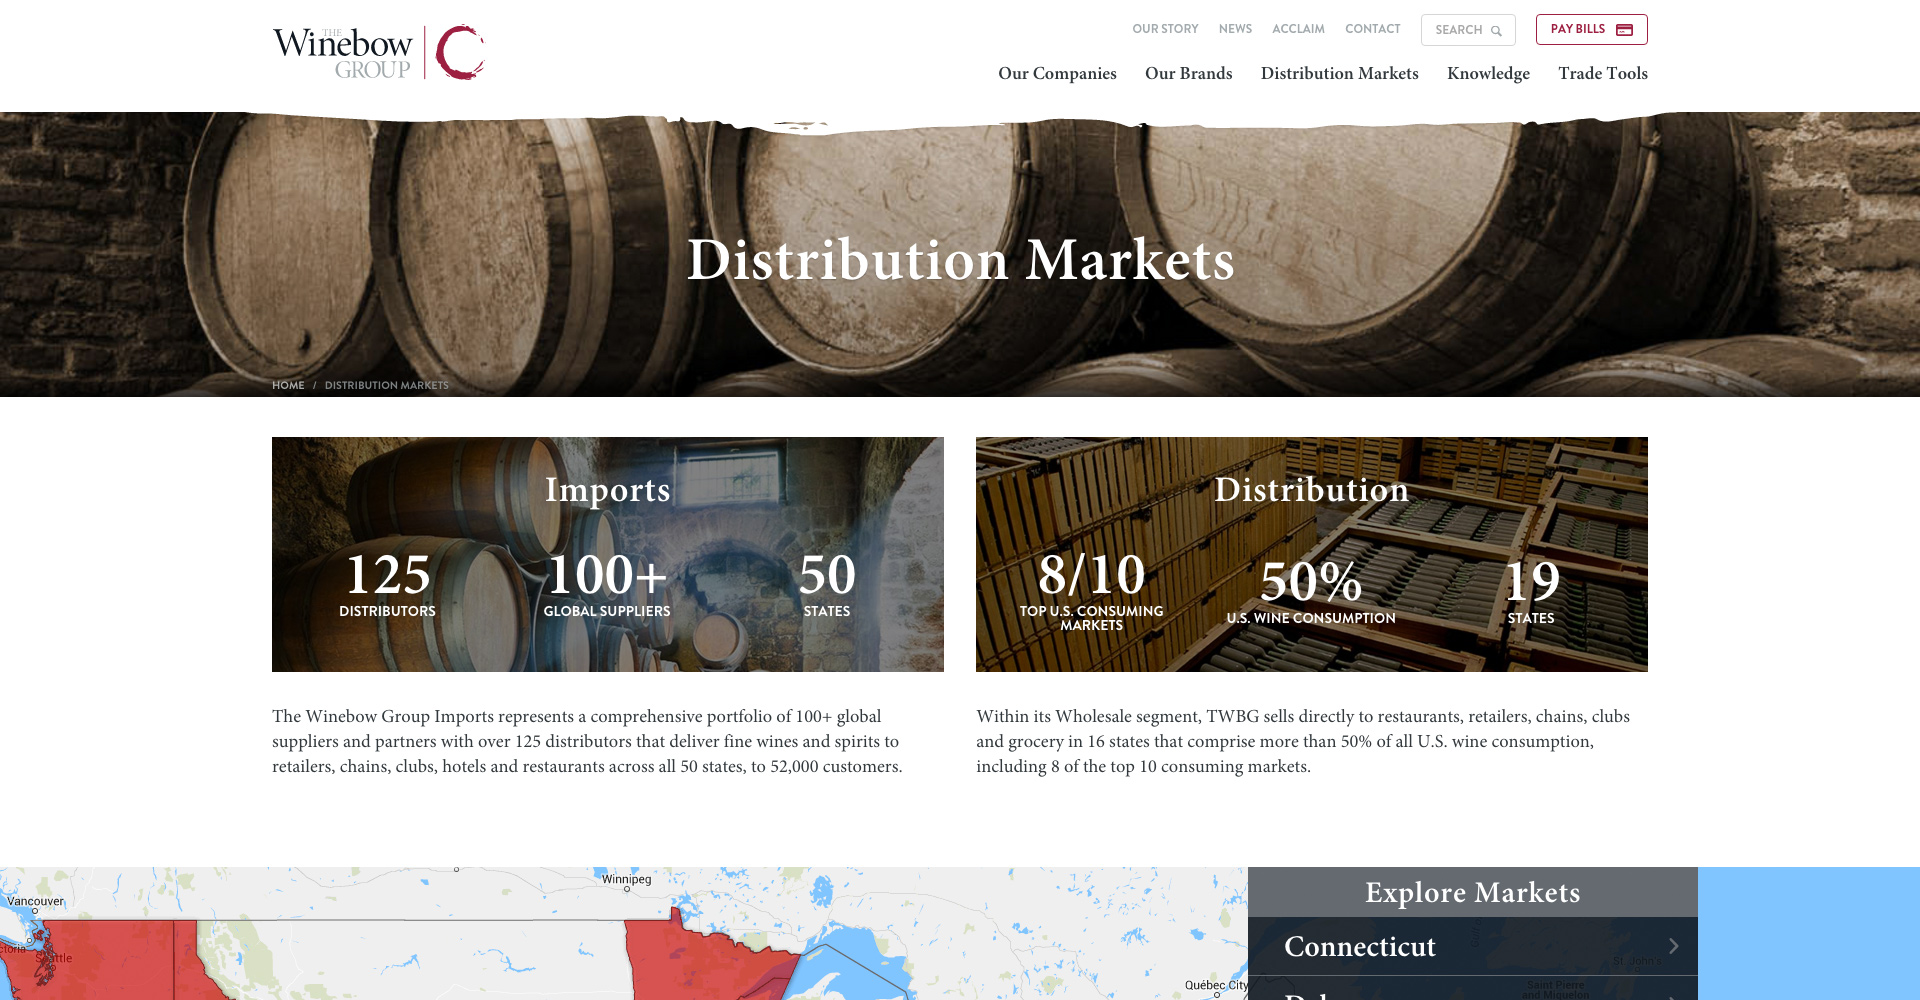 the winebow distribution markets page